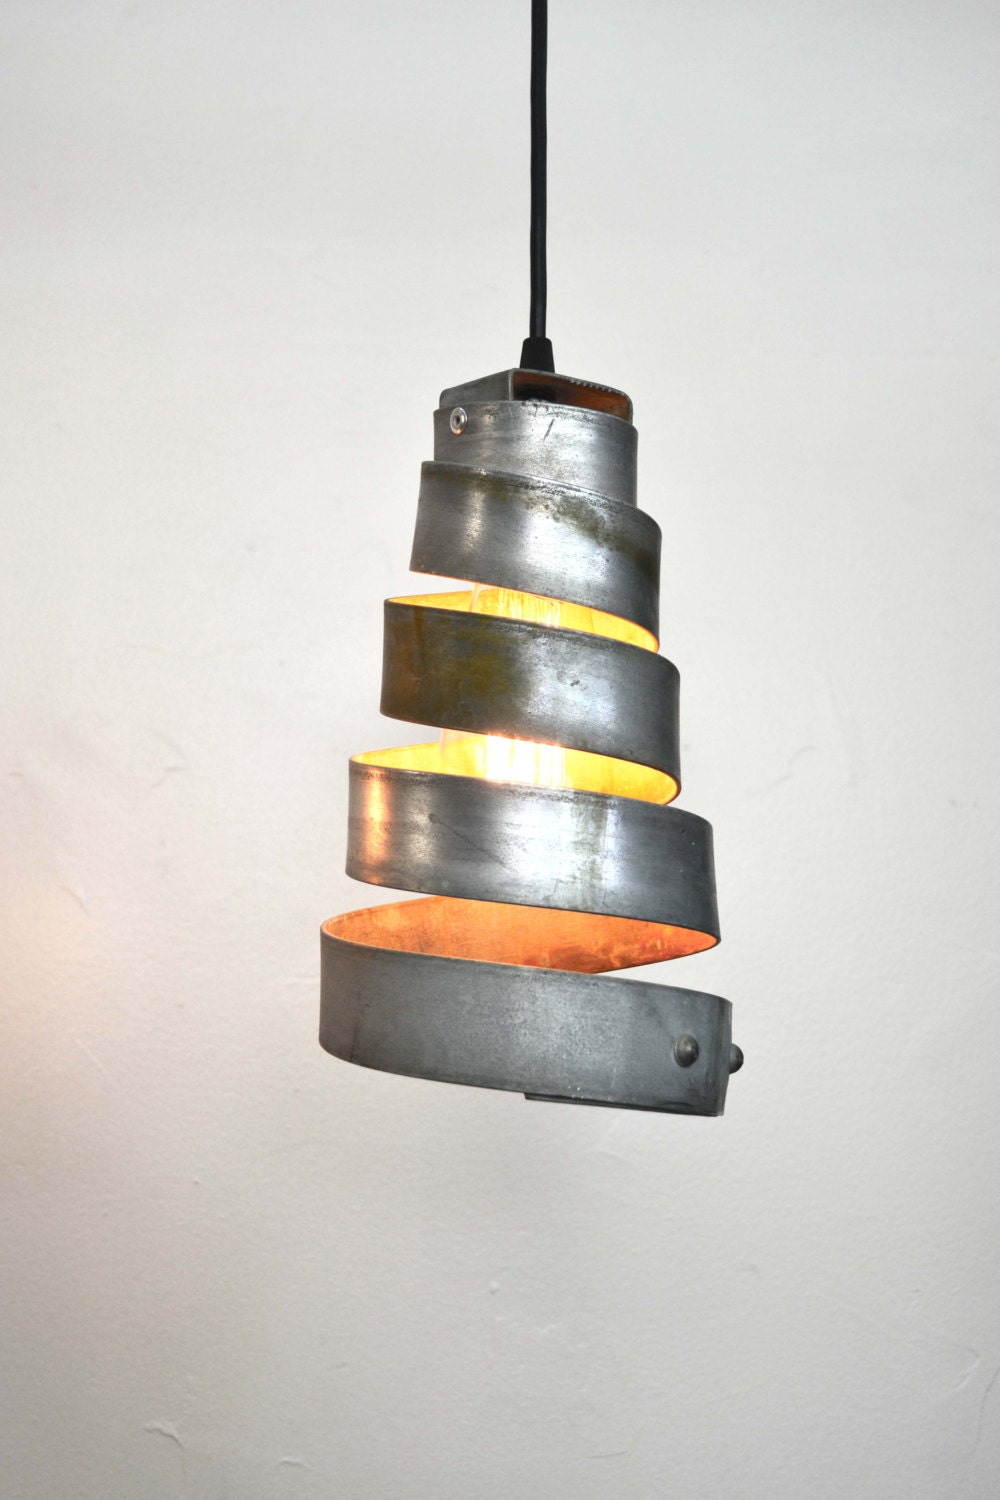 Wine Barrel Ring Pendant Light - Manacle - Made from retired California wine barrel rings 100% Recycled!